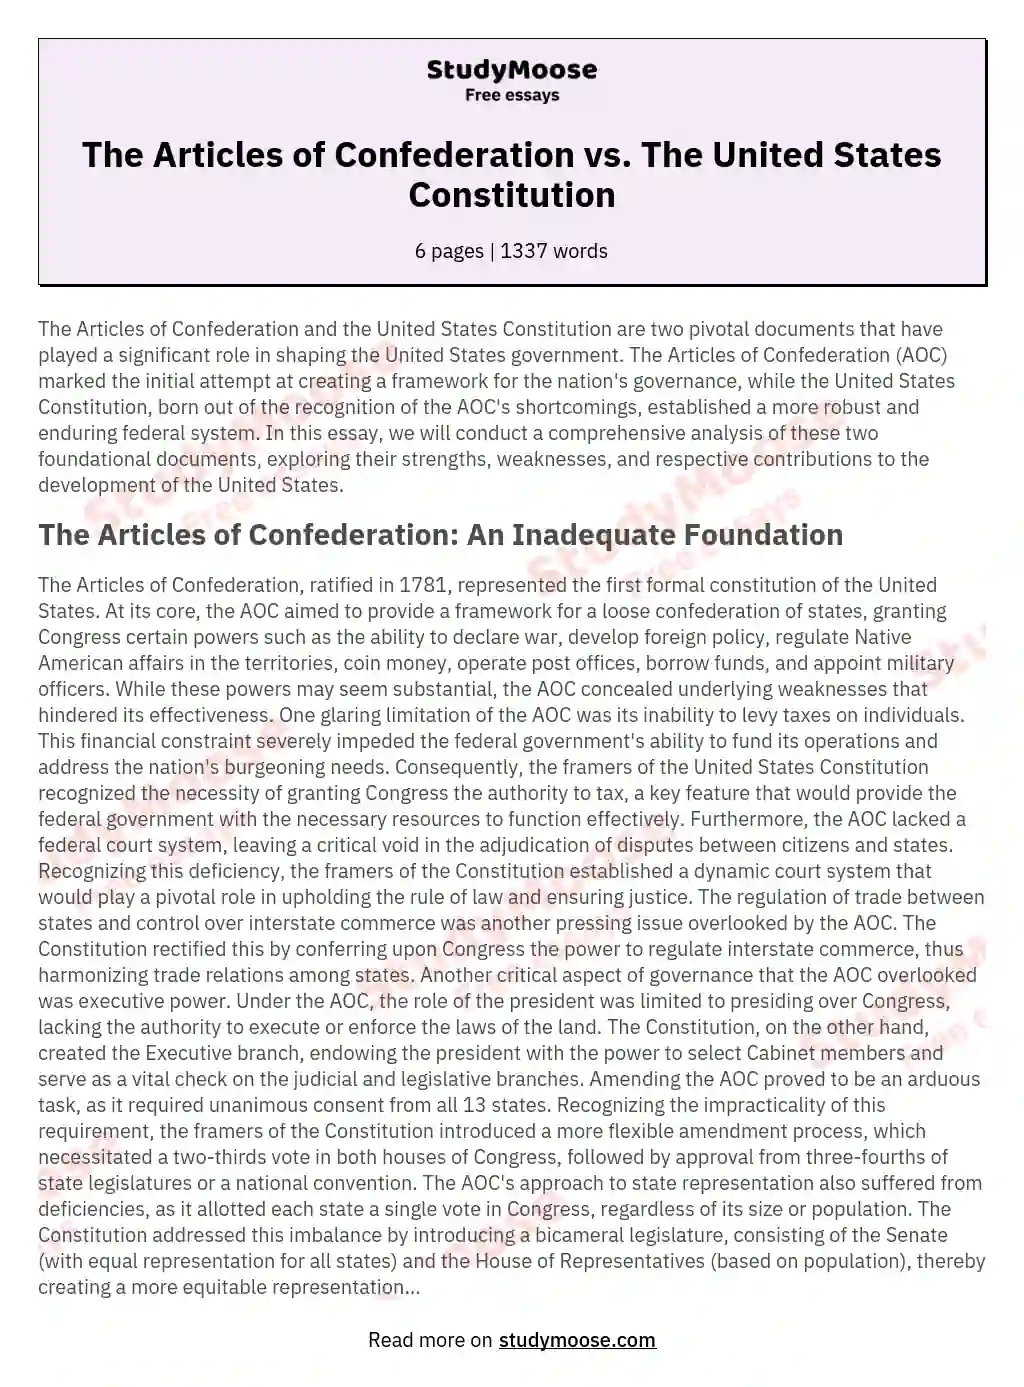 The Articles of Confederation vs. The United States Constitution essay